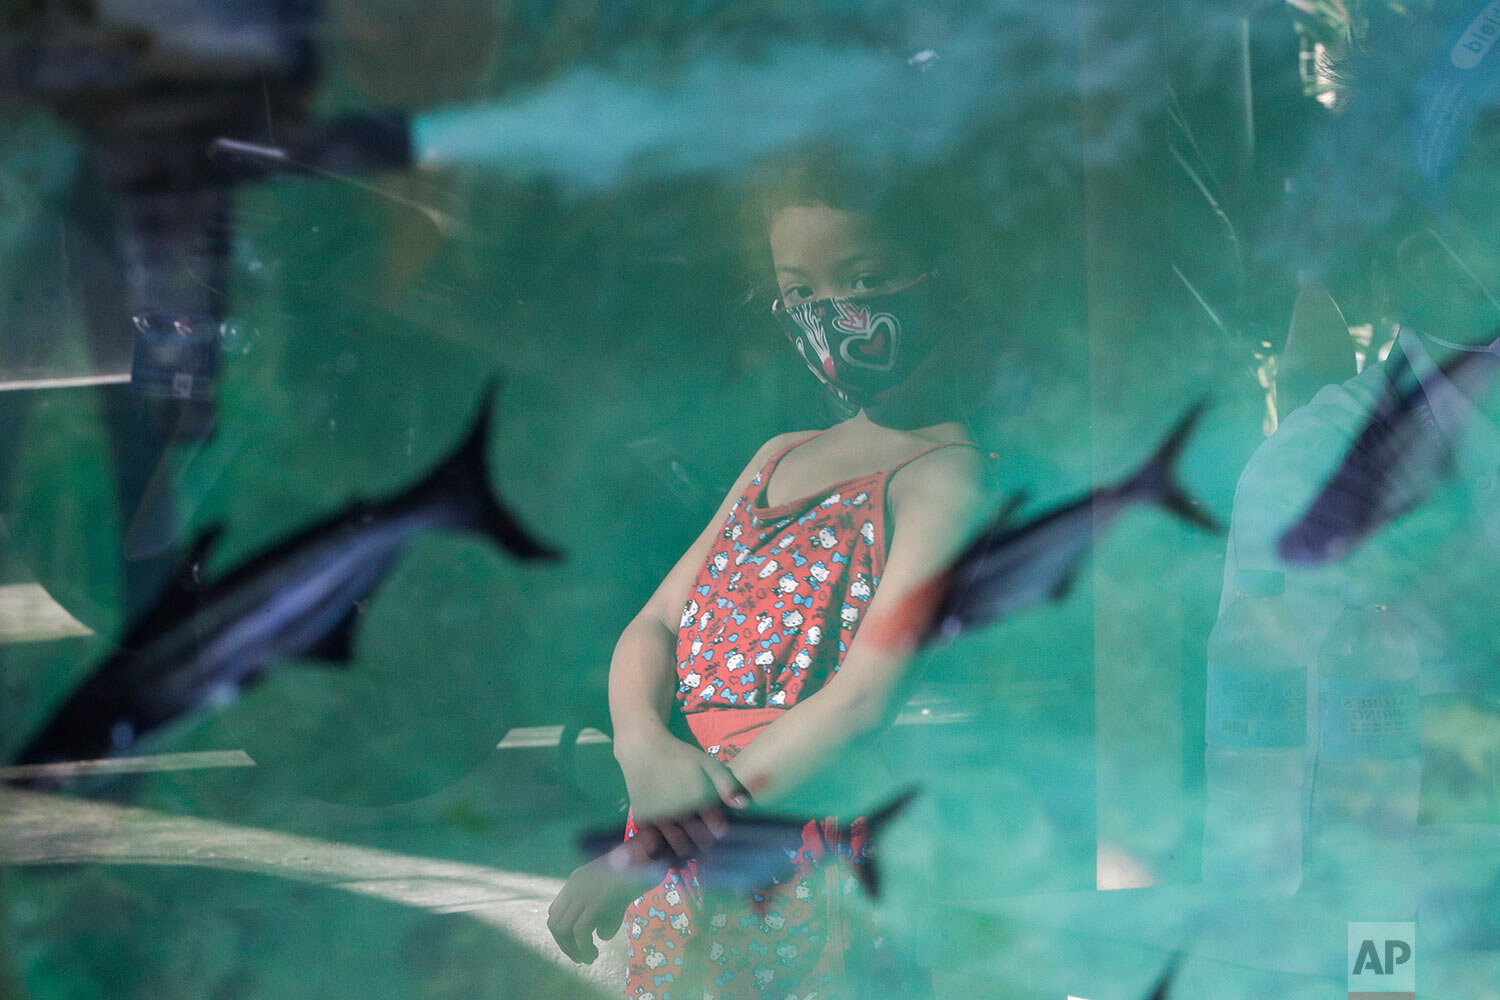  Yuna Recio, of the Philippines, wears a protective masks to prevent the spread of the new coronavirus as she looks at an aquarium at the Tandang Sora jeepney terminal in Quezon city, Philippines on Monday, Oct. 5, 2020. (AP Photo/Aaron Favila) 